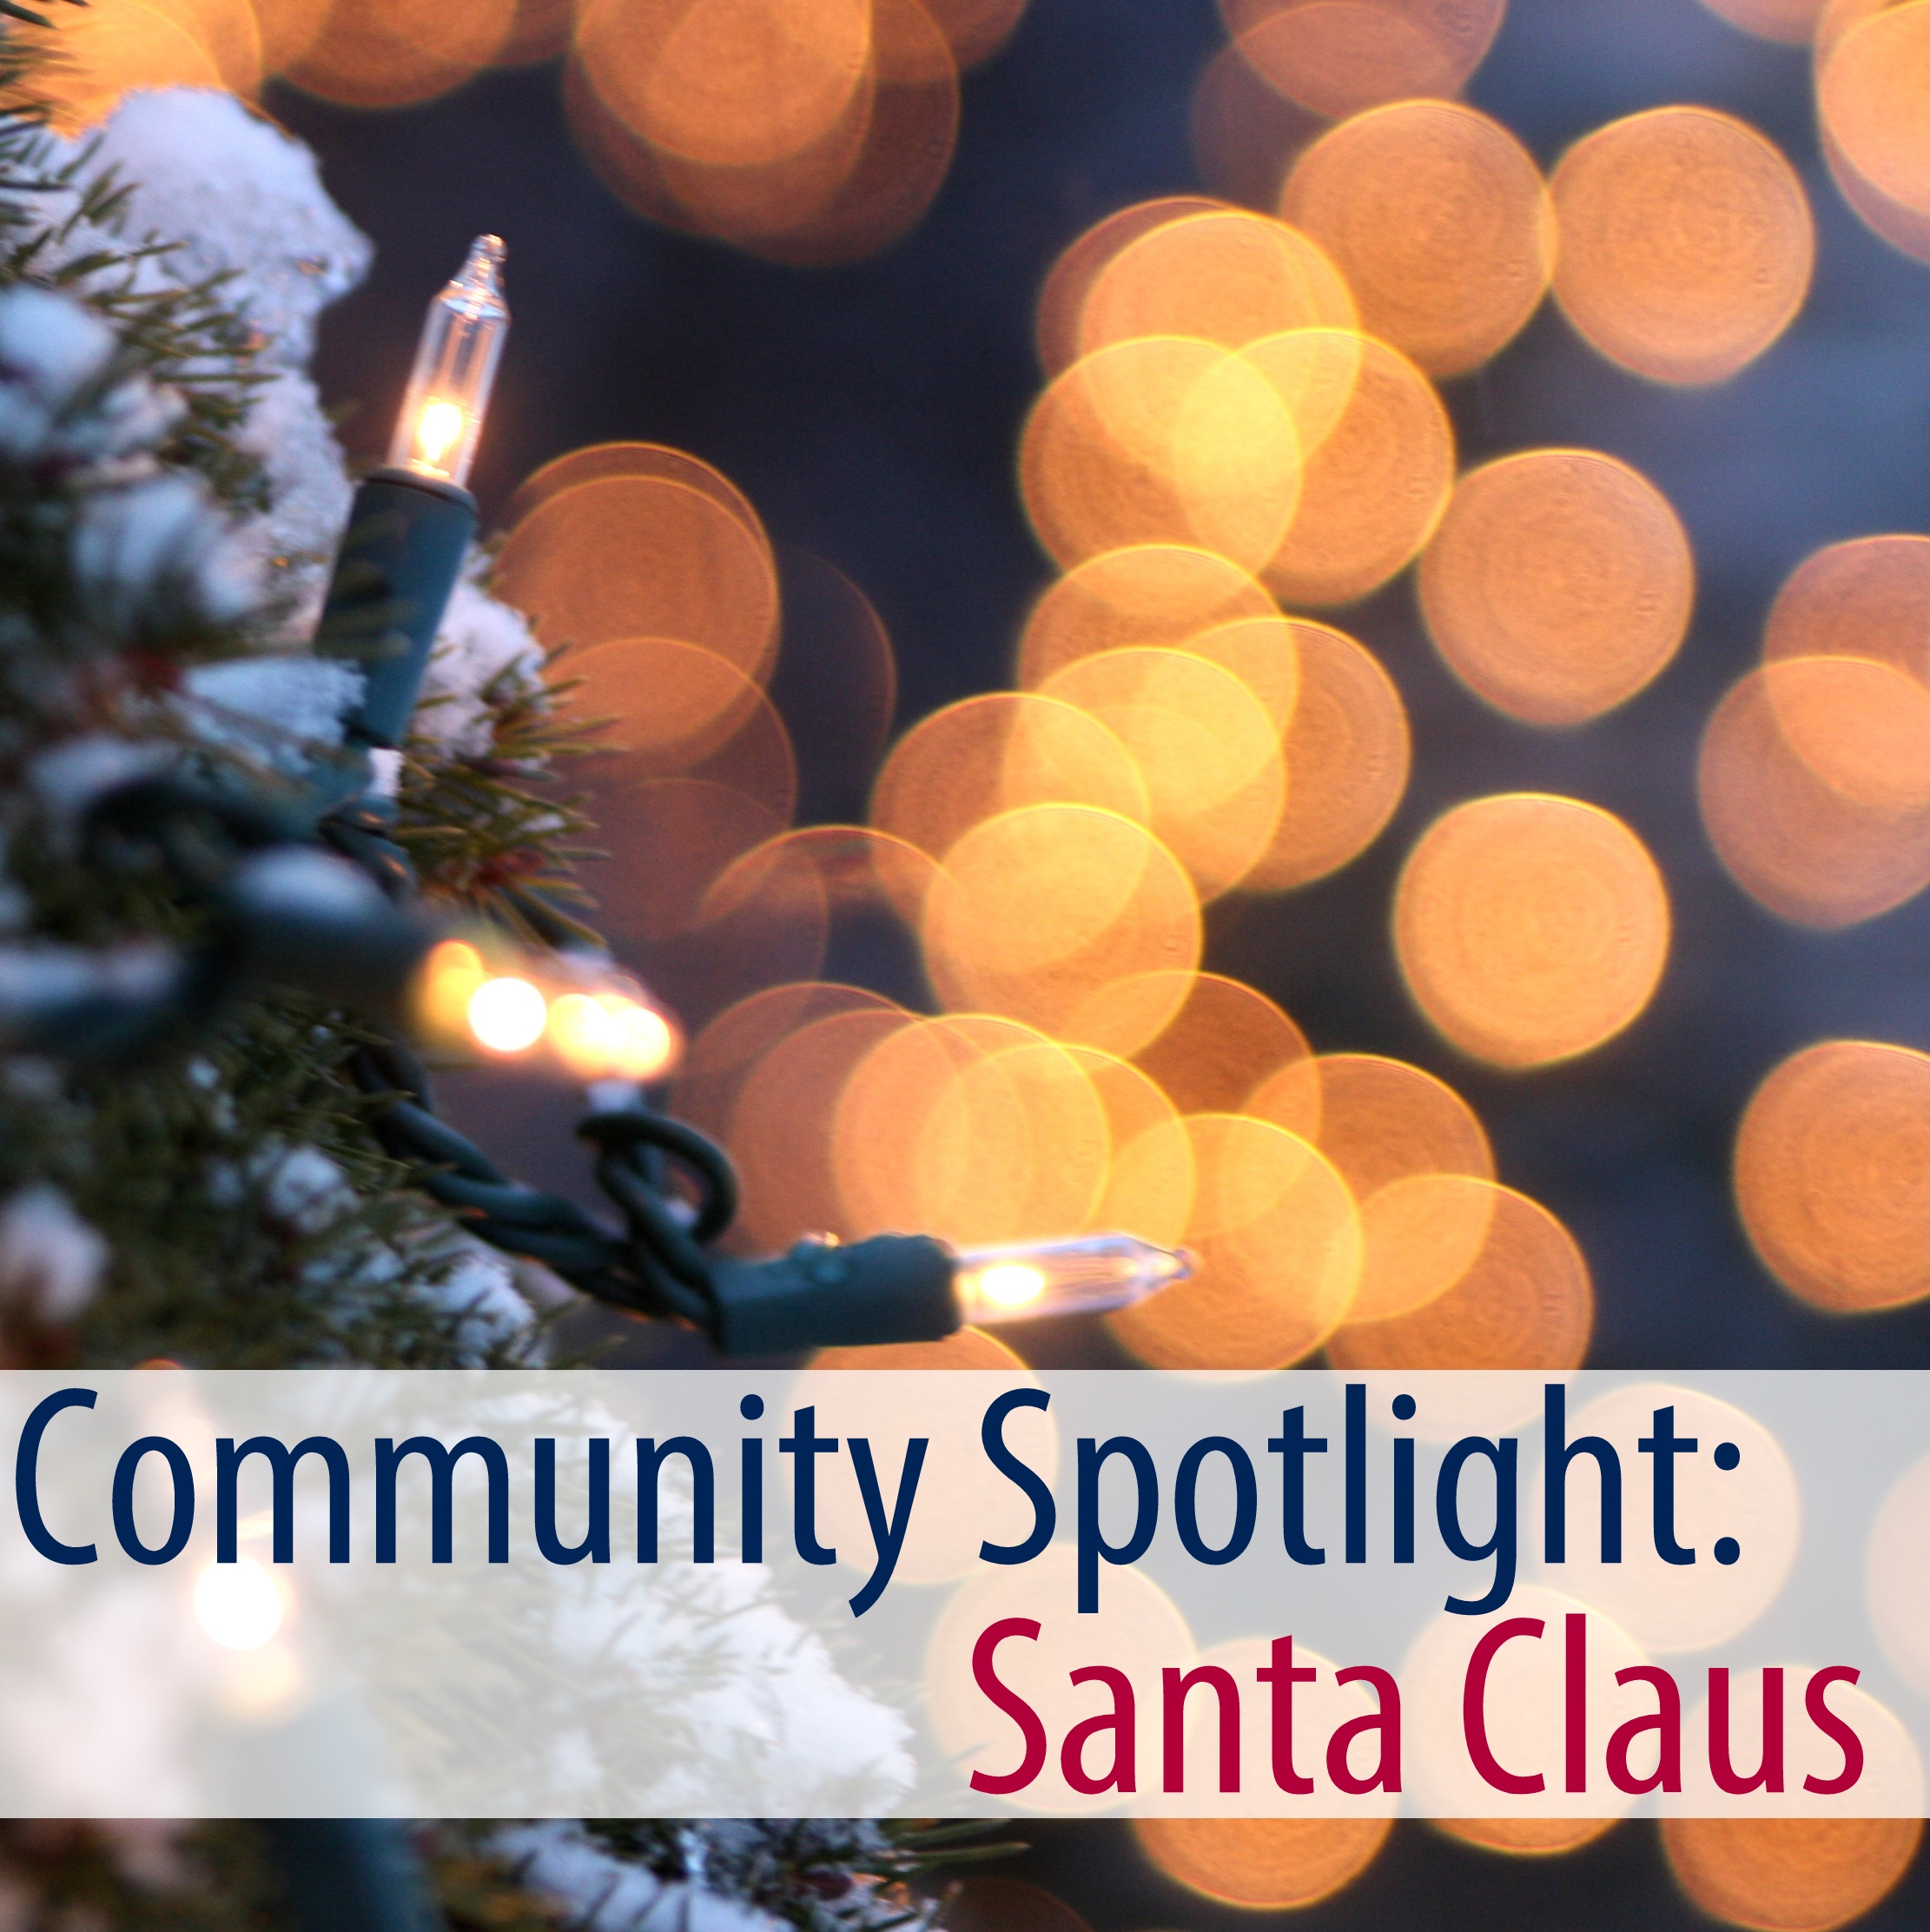 At the heart of Hancock County are the people who make up the community and this month we are shining the spotlight on a special community member, Santa Claus! • VisitFindlay.com